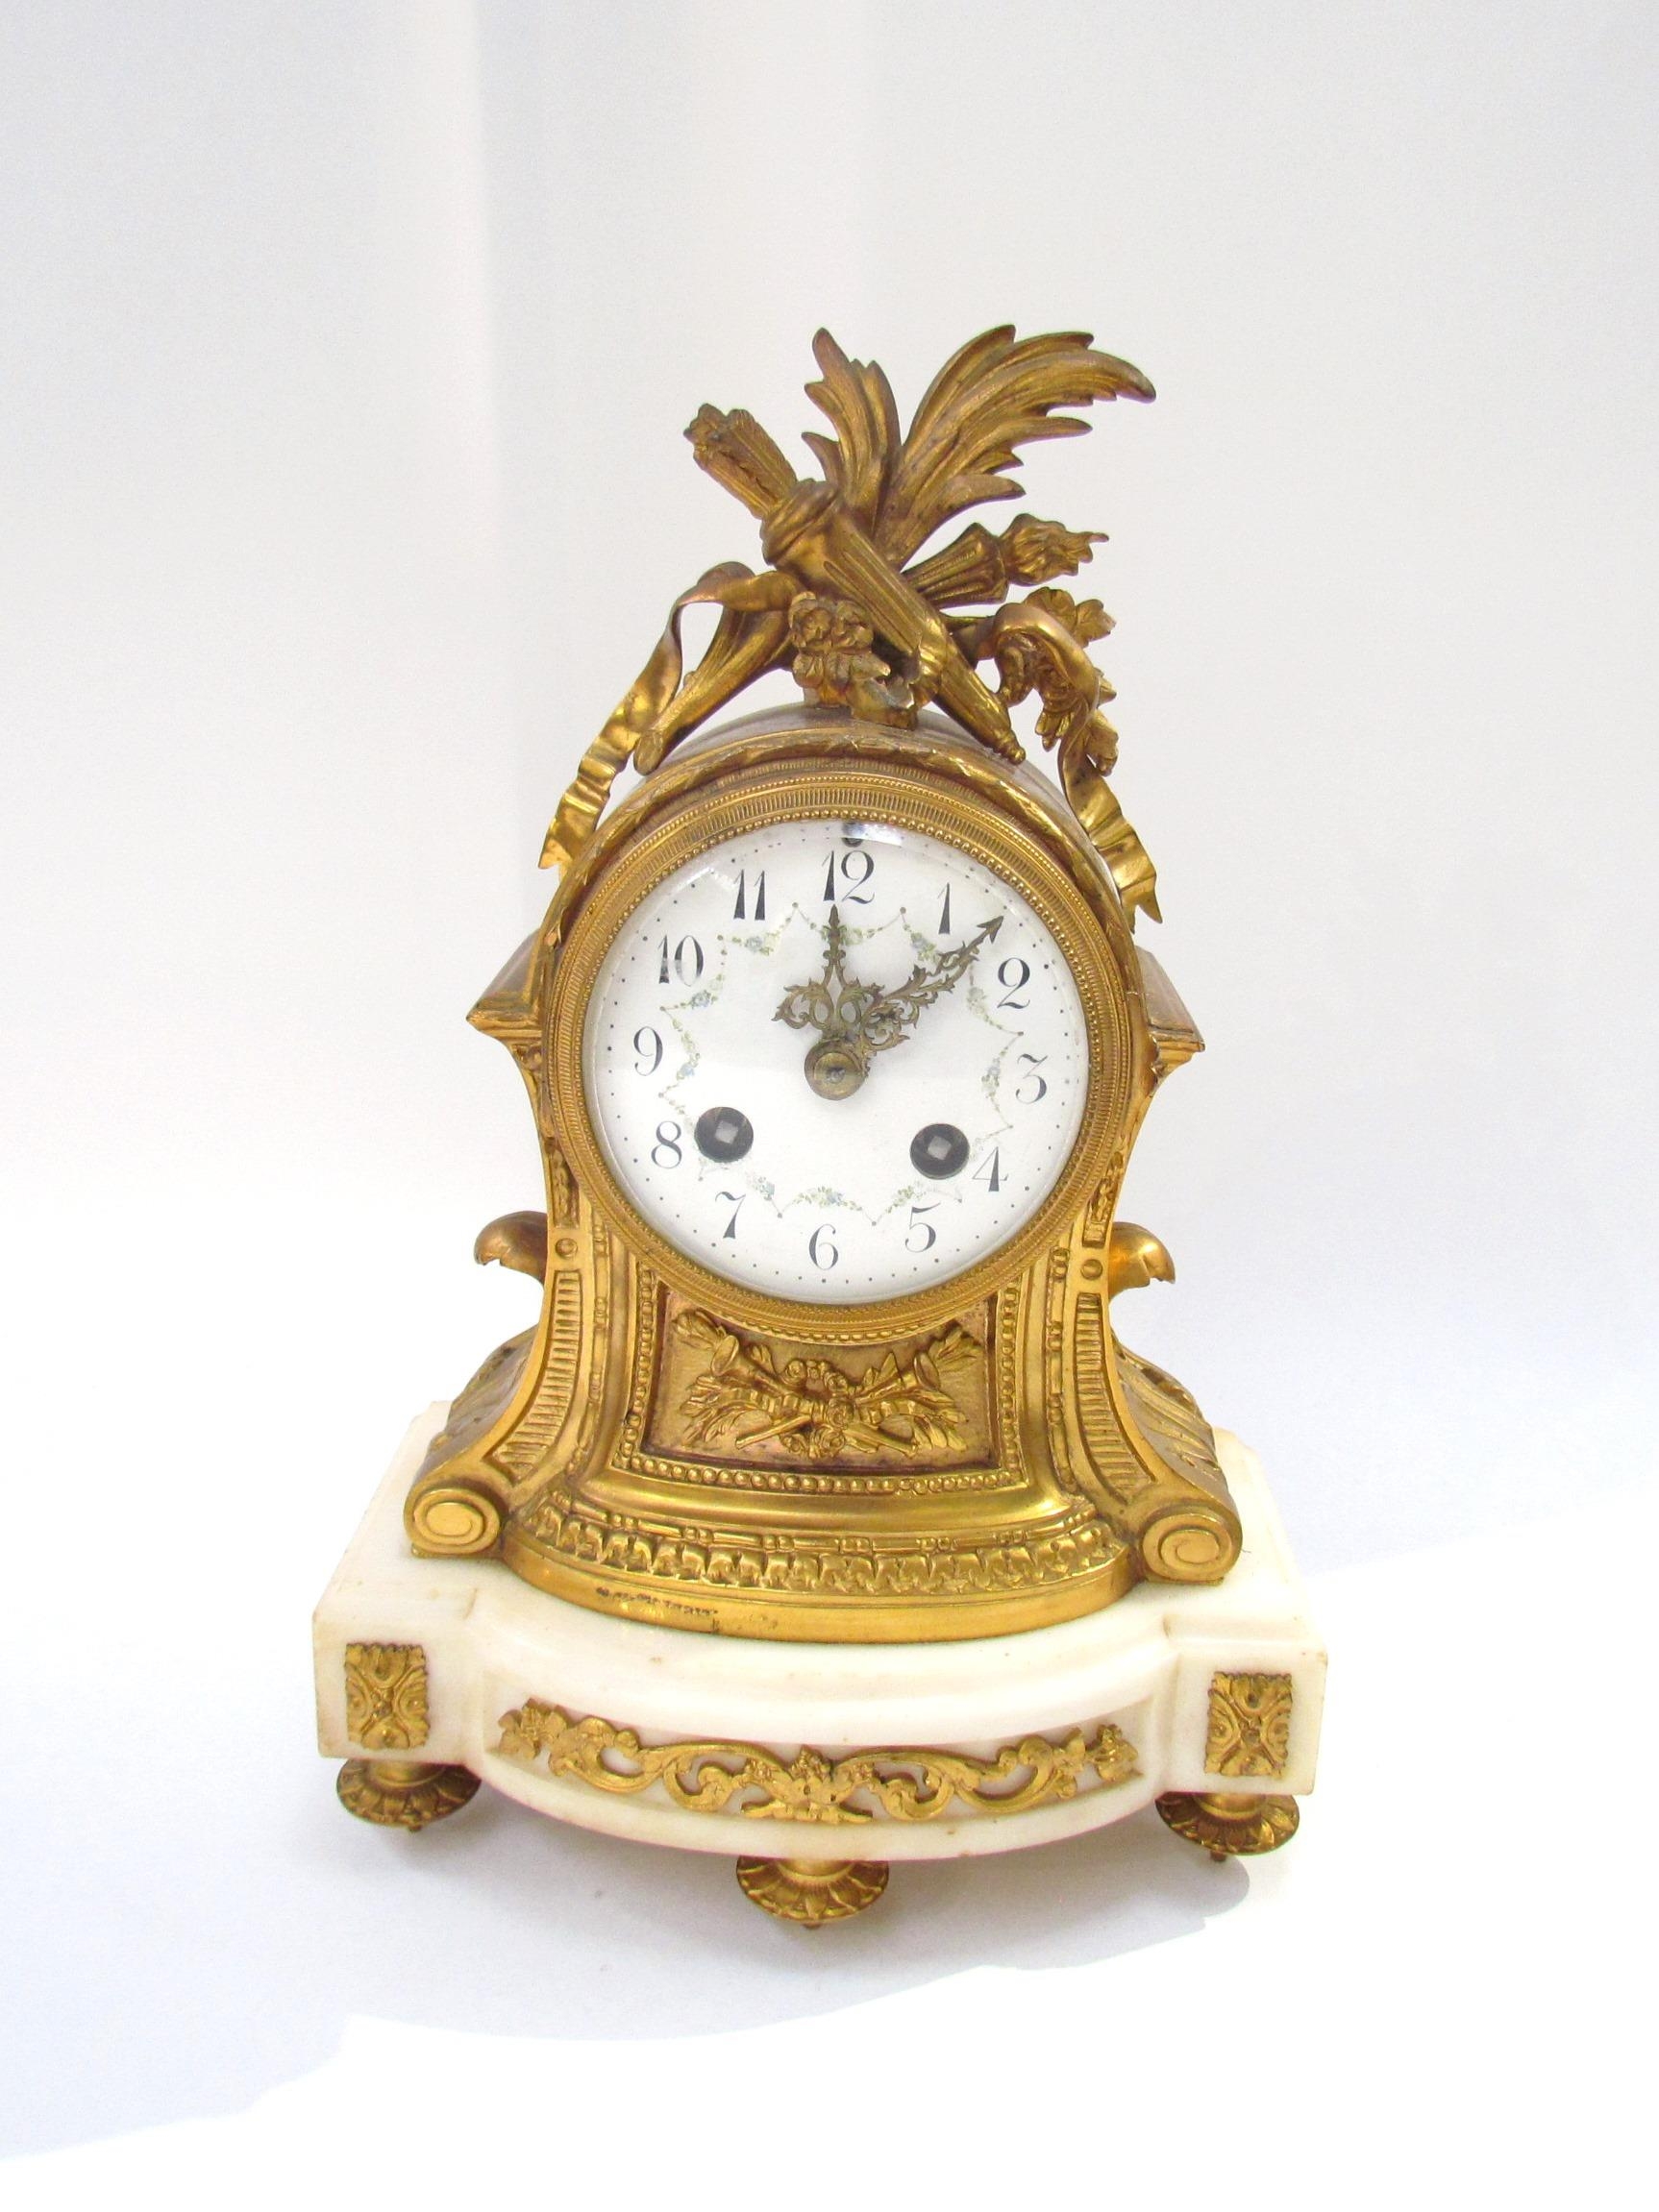 An early 19th Century French Ormolu mantel clock with white enamel dial, Arabic numerals with two